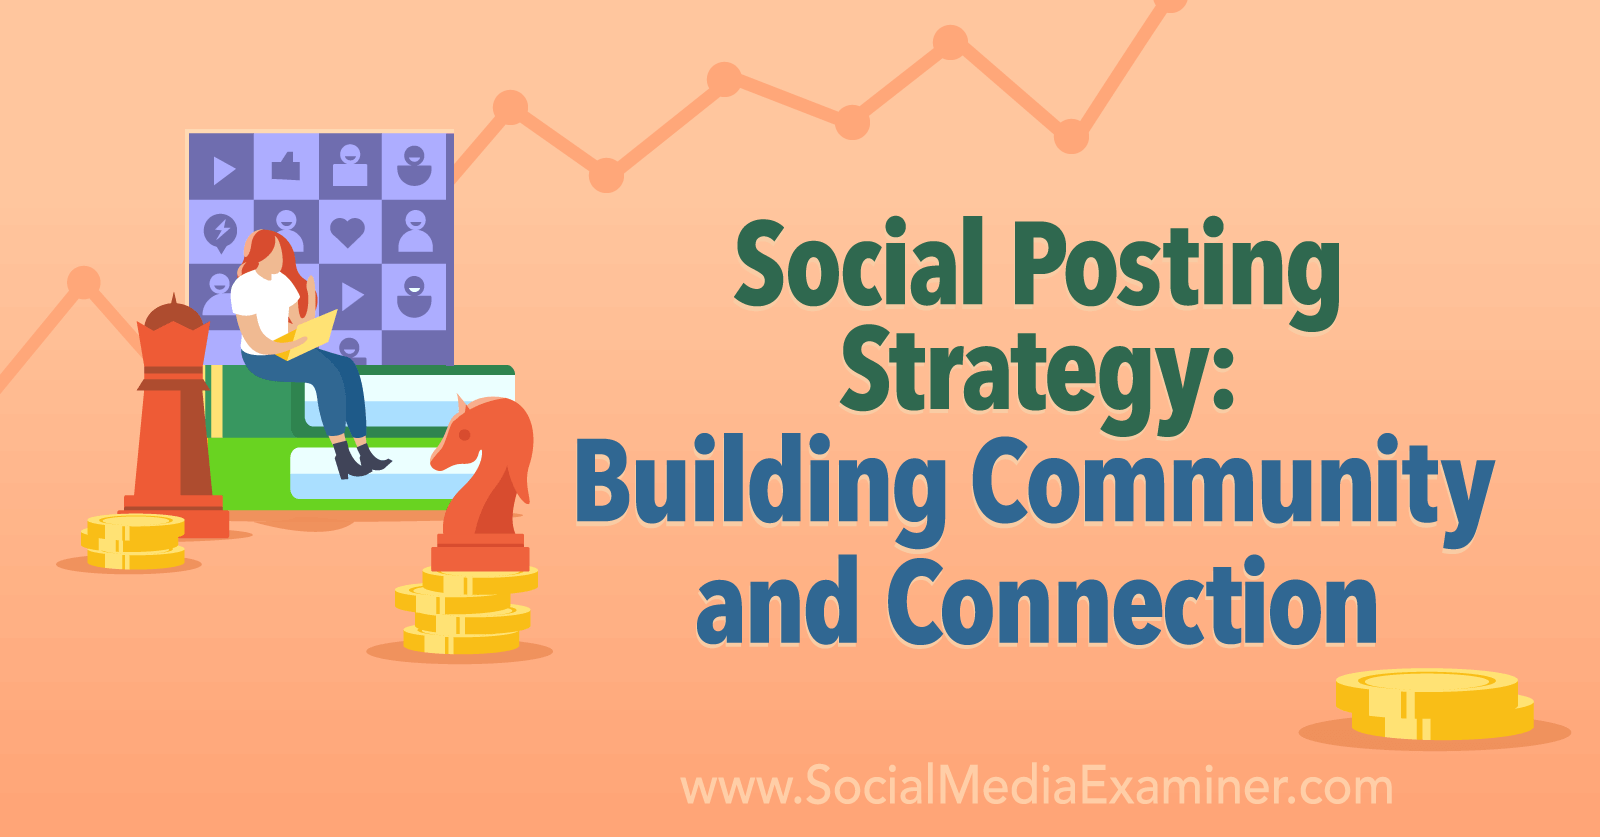 Social Posting Strategy: Building Community and Connection by Social Media Examiner